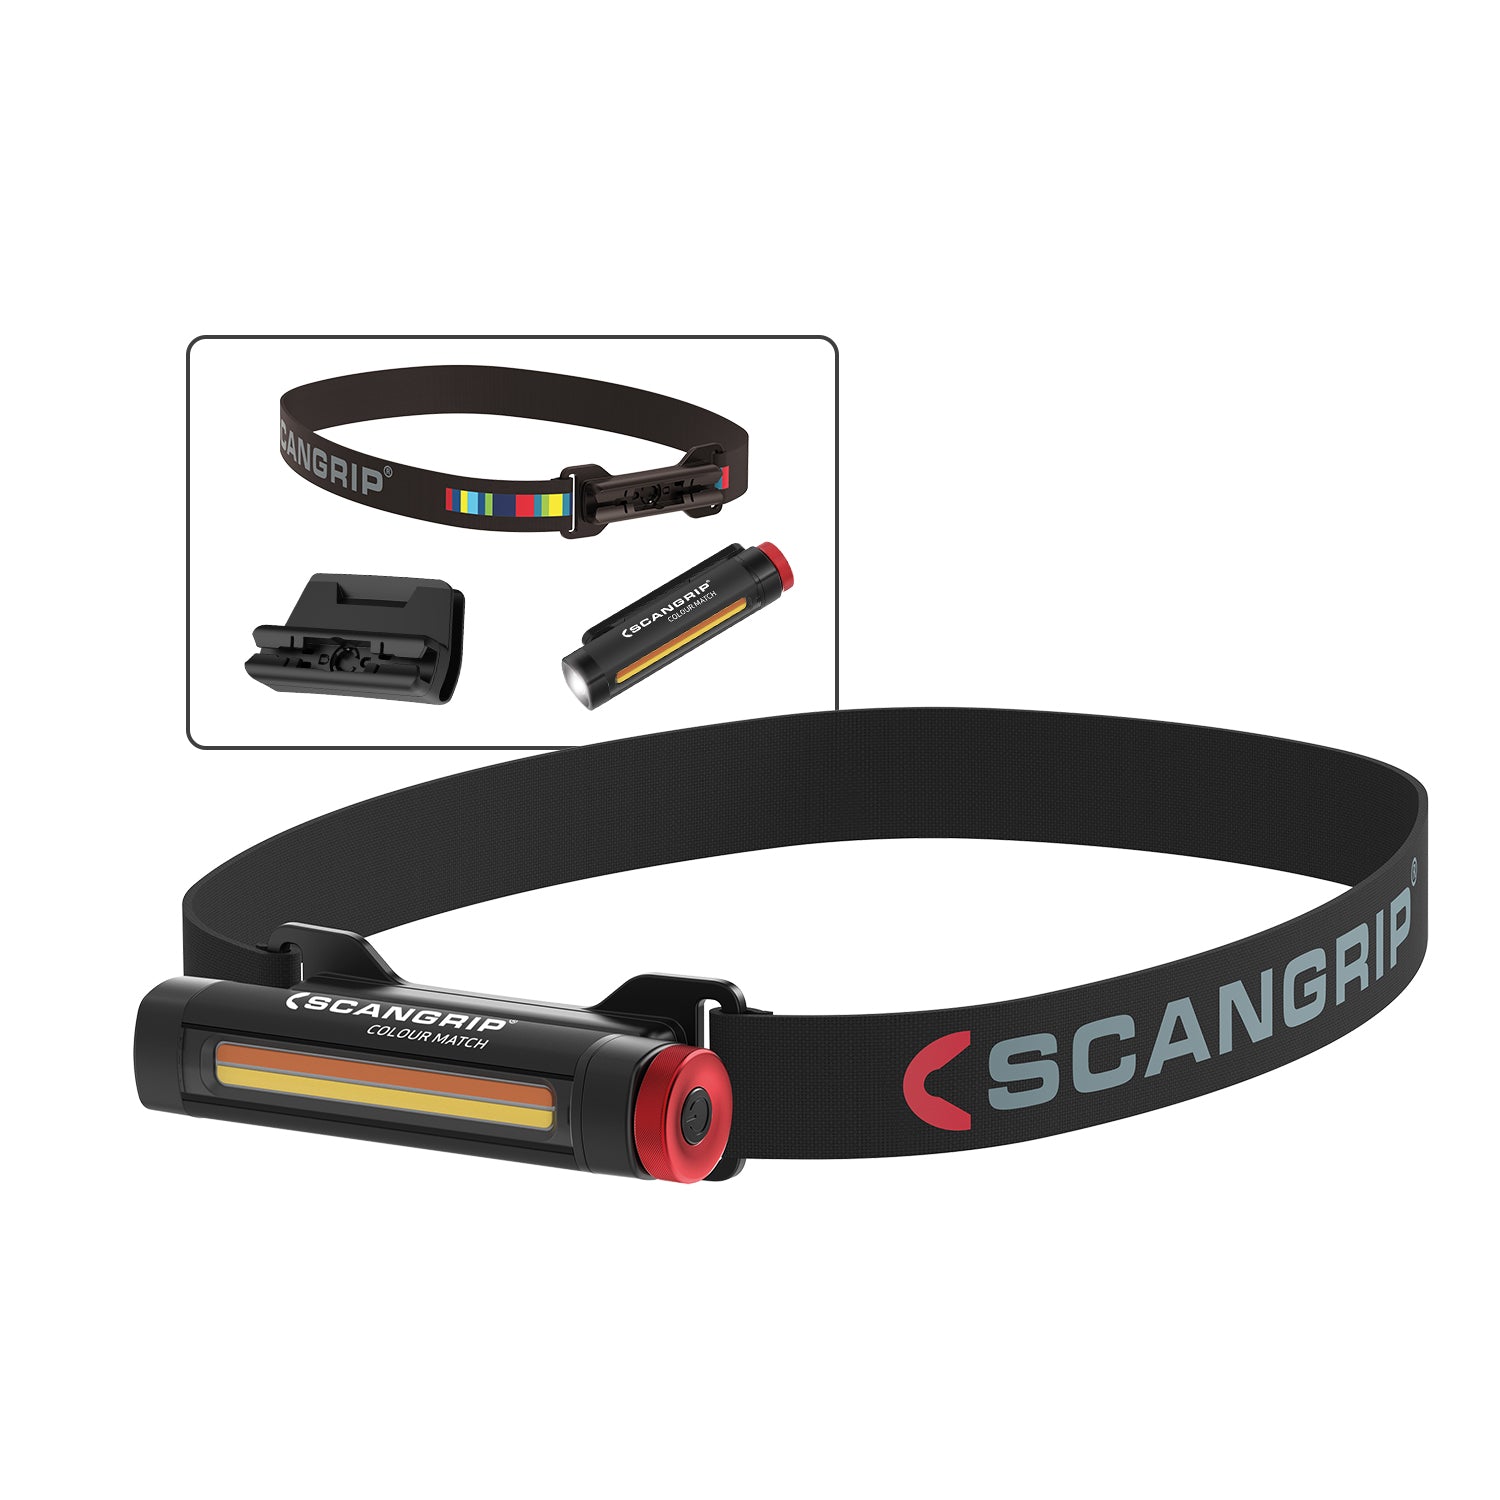 Scangrip Unimatch is a multifunctional led headlamp for any detailing job. Battery Operated Headlamp for poishing and detailing. Swirl marks. Scangrip Ireland